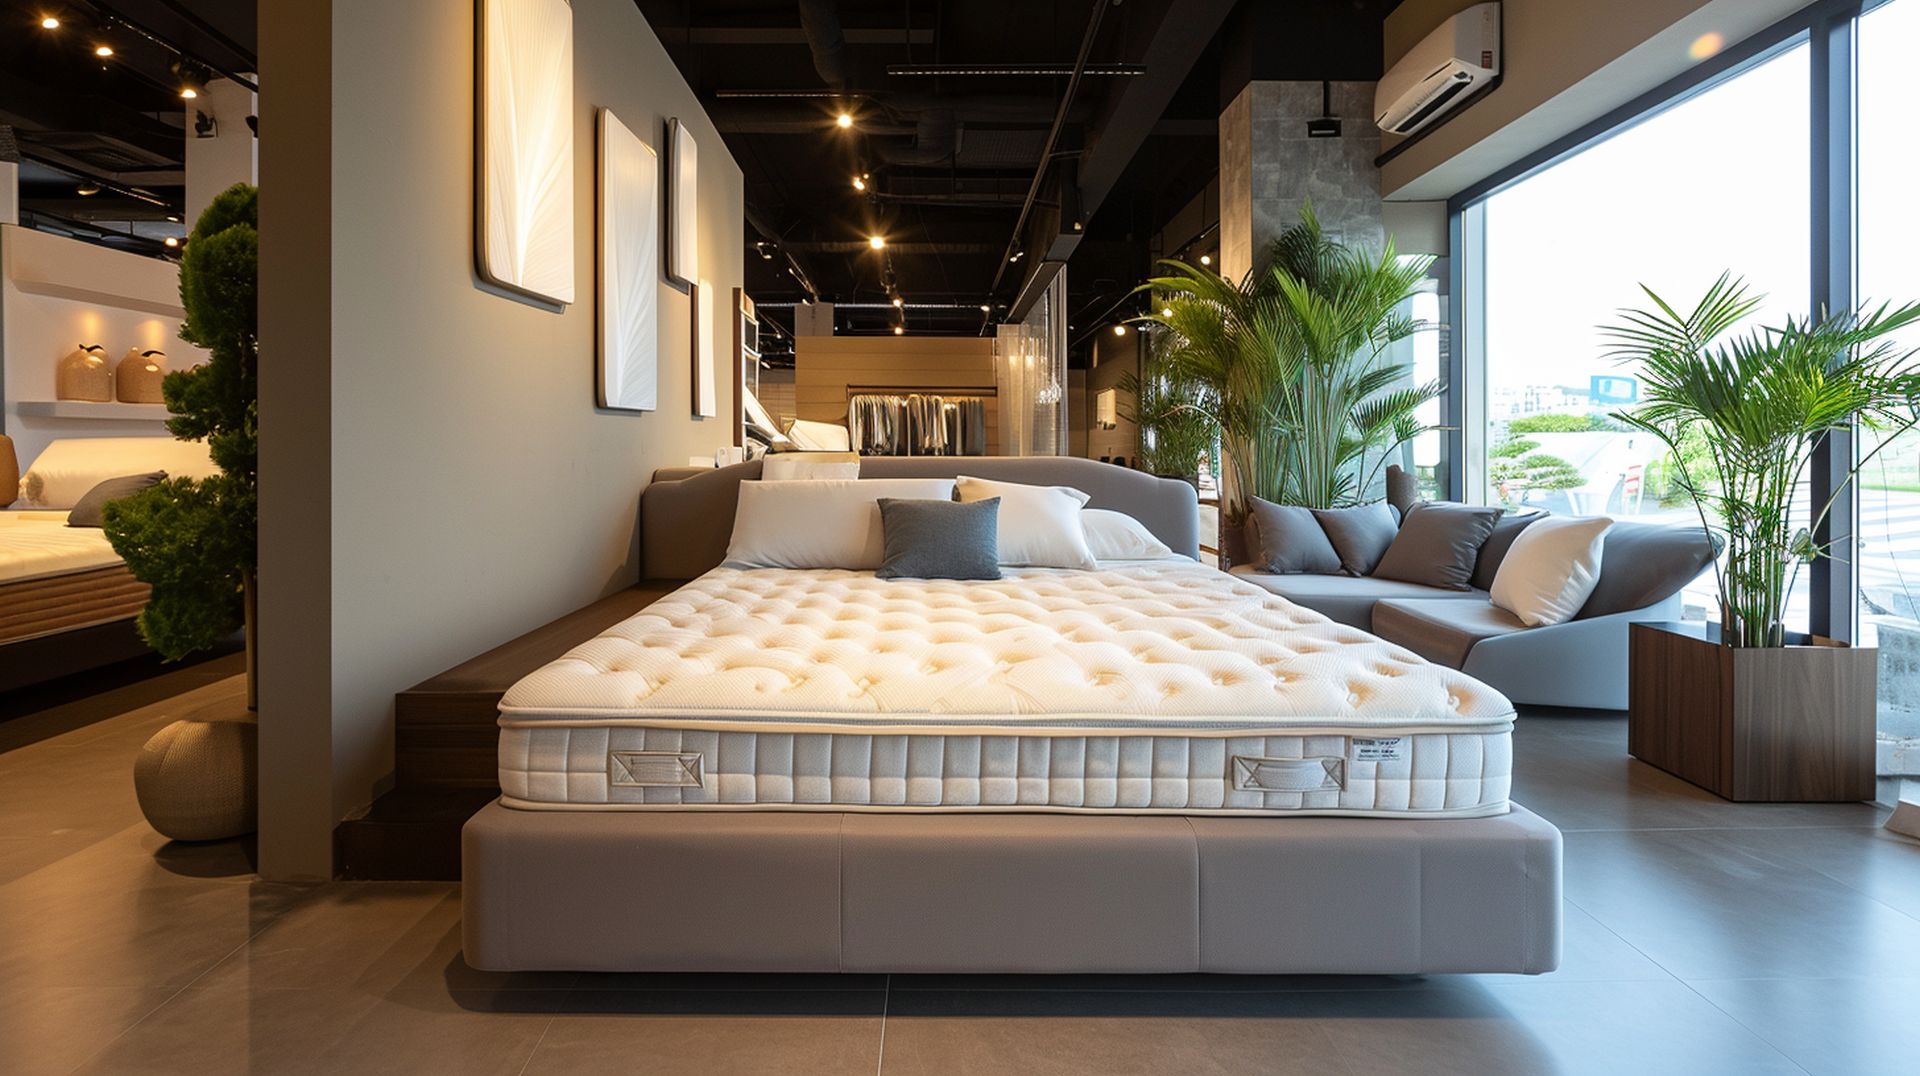 Local Prescott Valley mattress stores have the best prices, sales, and deals if you're looking for a new mattress in Prescott Valley